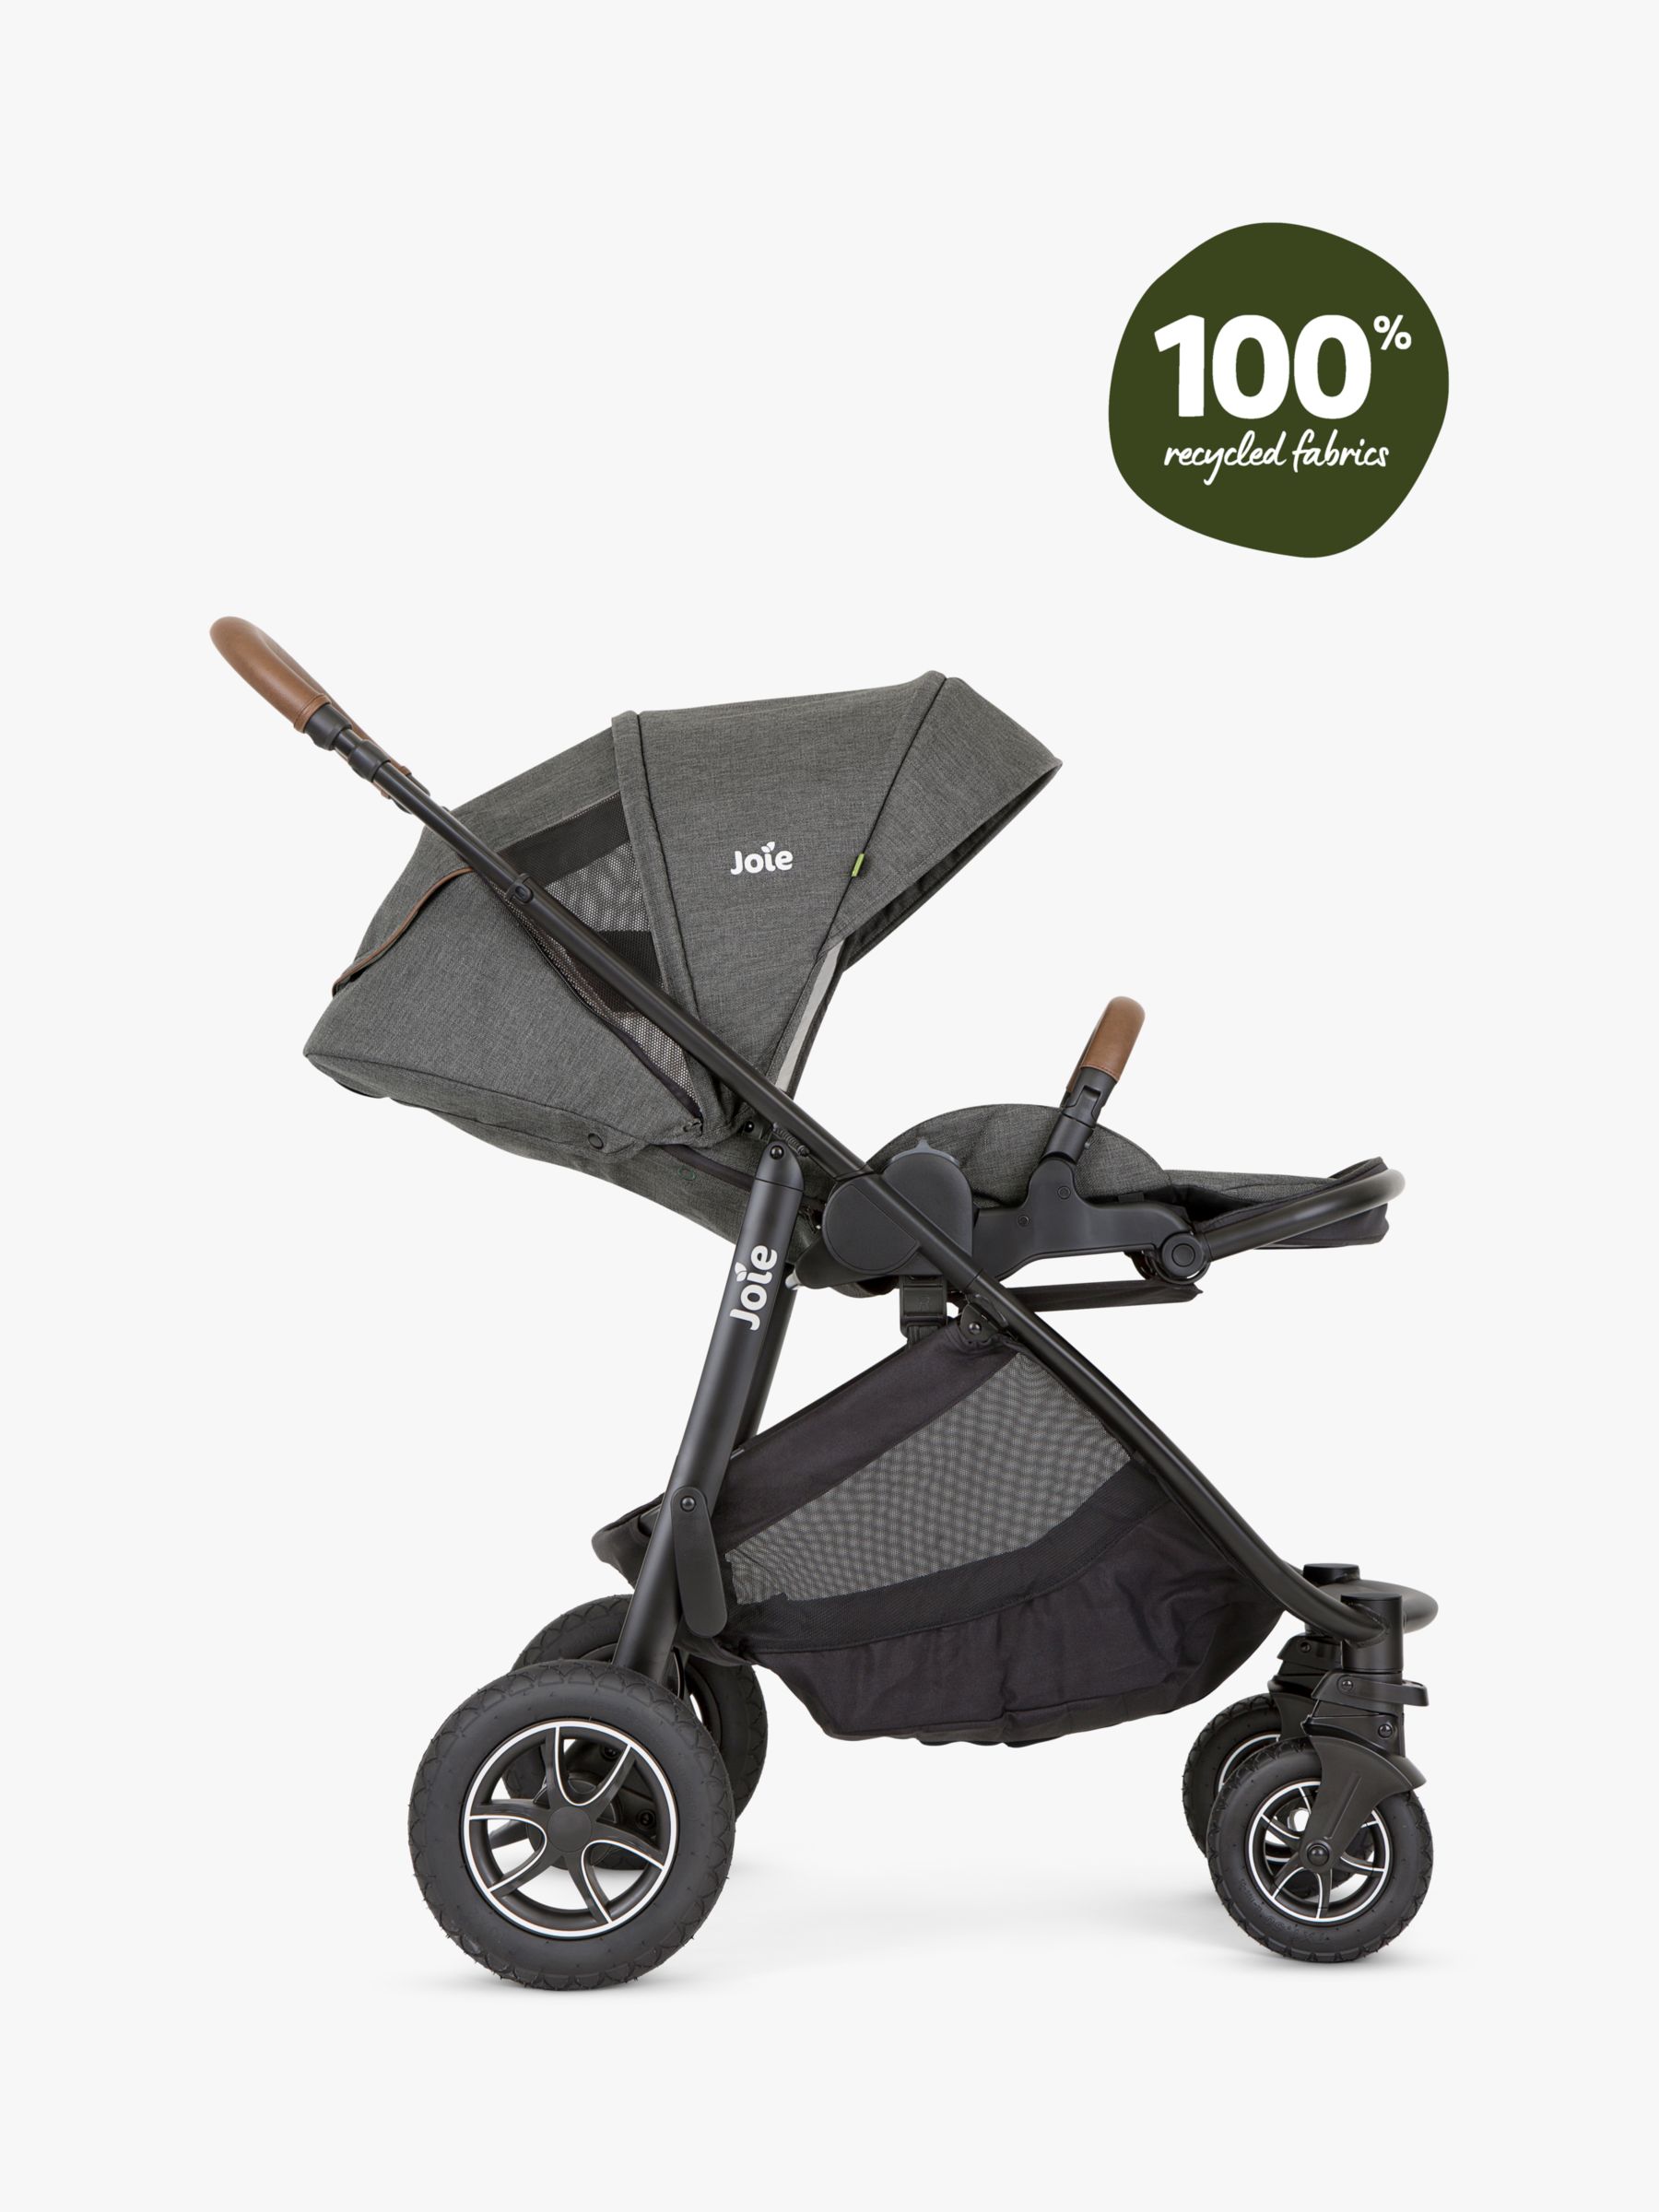 Joie Baby Versatrax Trio Cycle Pushchair with Carrycot i-Snug 2 Car Seat  Bundle, Shell Grey